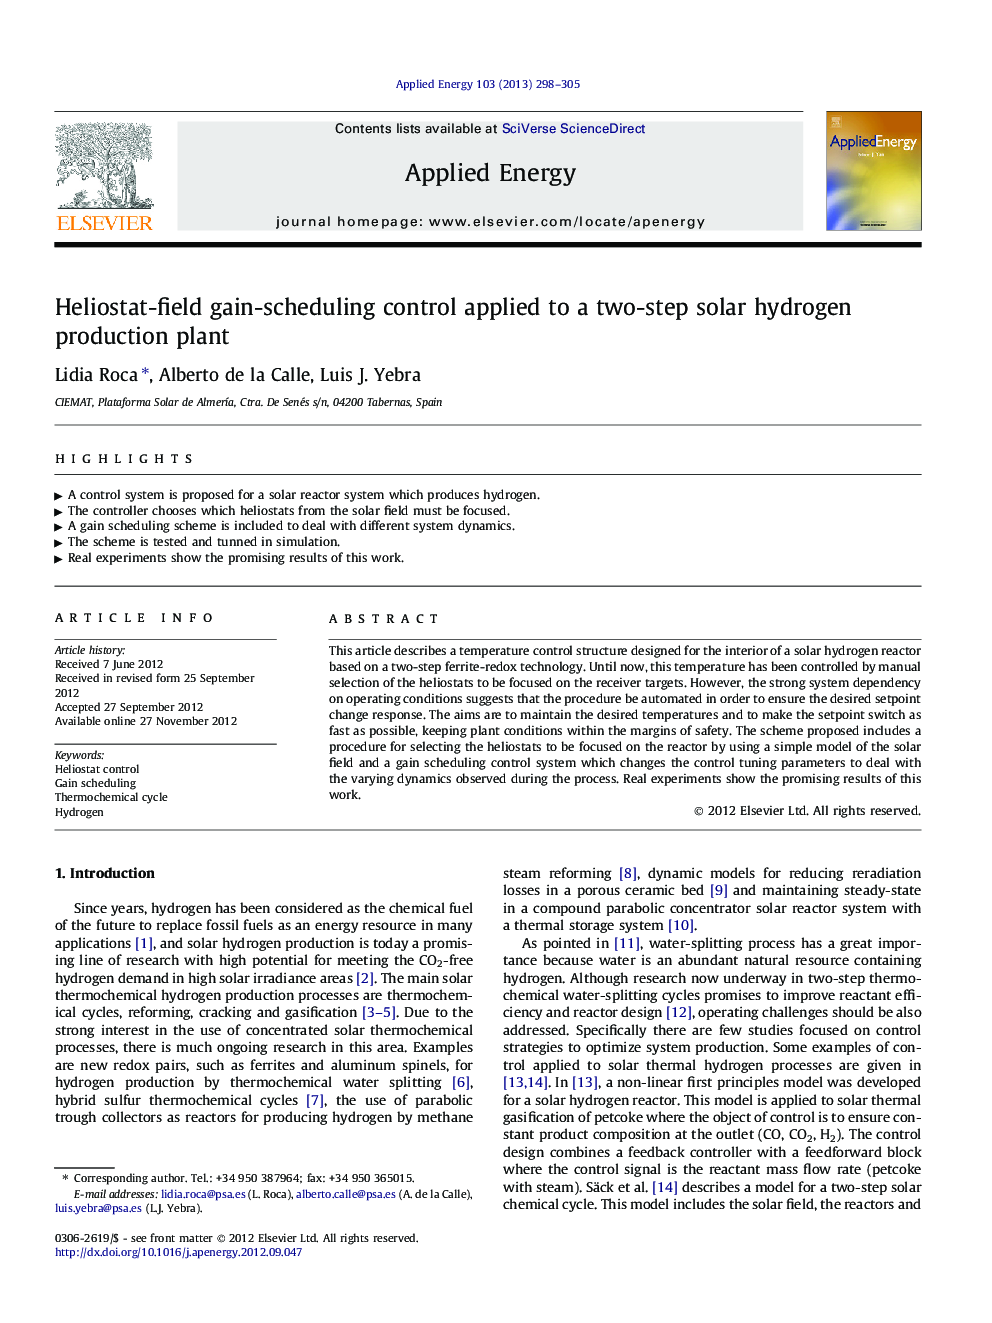 Heliostat-field gain-scheduling control applied to a two-step solar hydrogen production plant